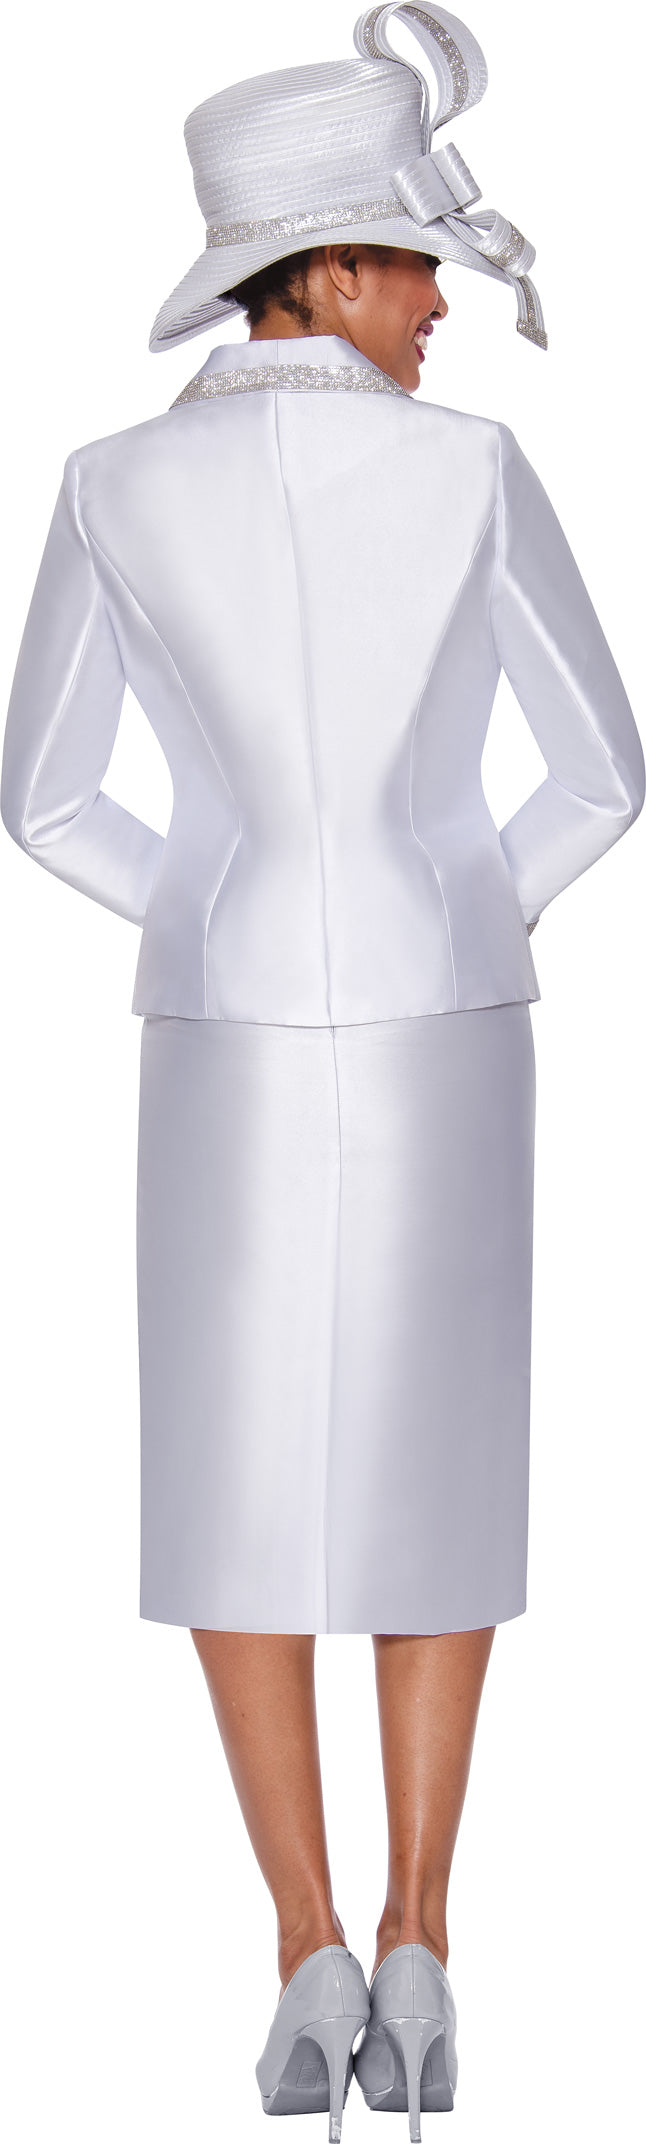 Mother of the Bride Dresses Two Piece Plus Size Mother of the Bride Jacket Skirt Set White